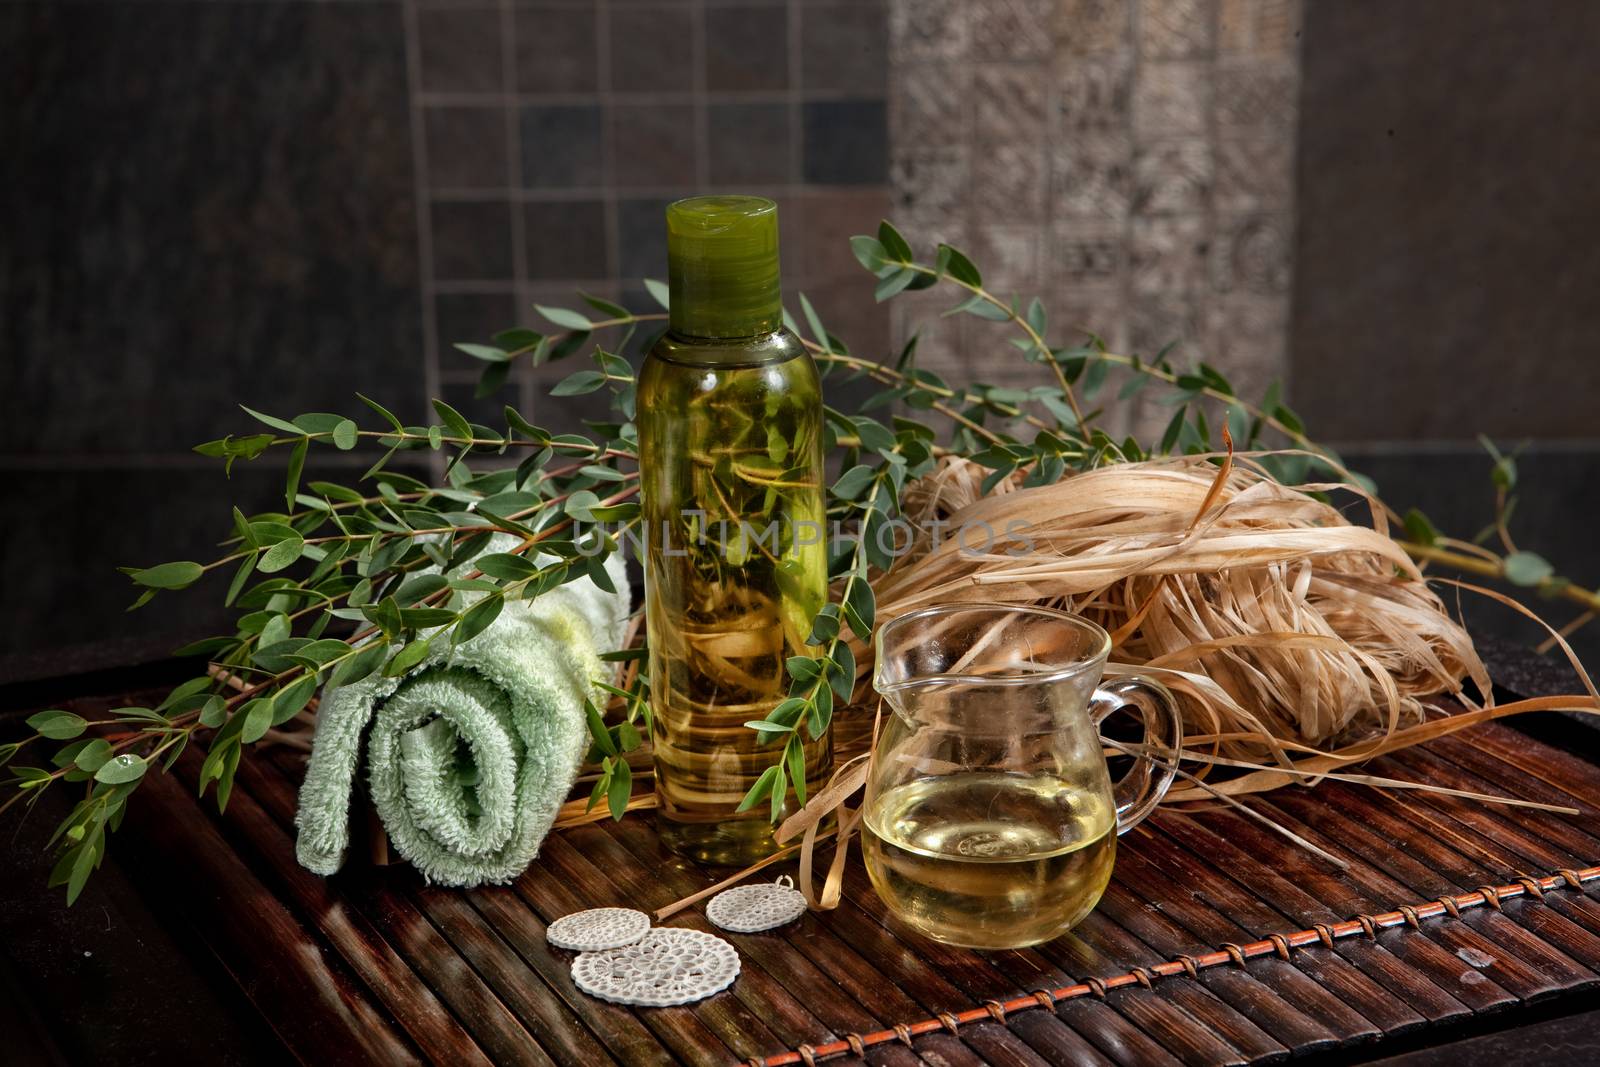 Oil, towels and green leaves on a wooden desk